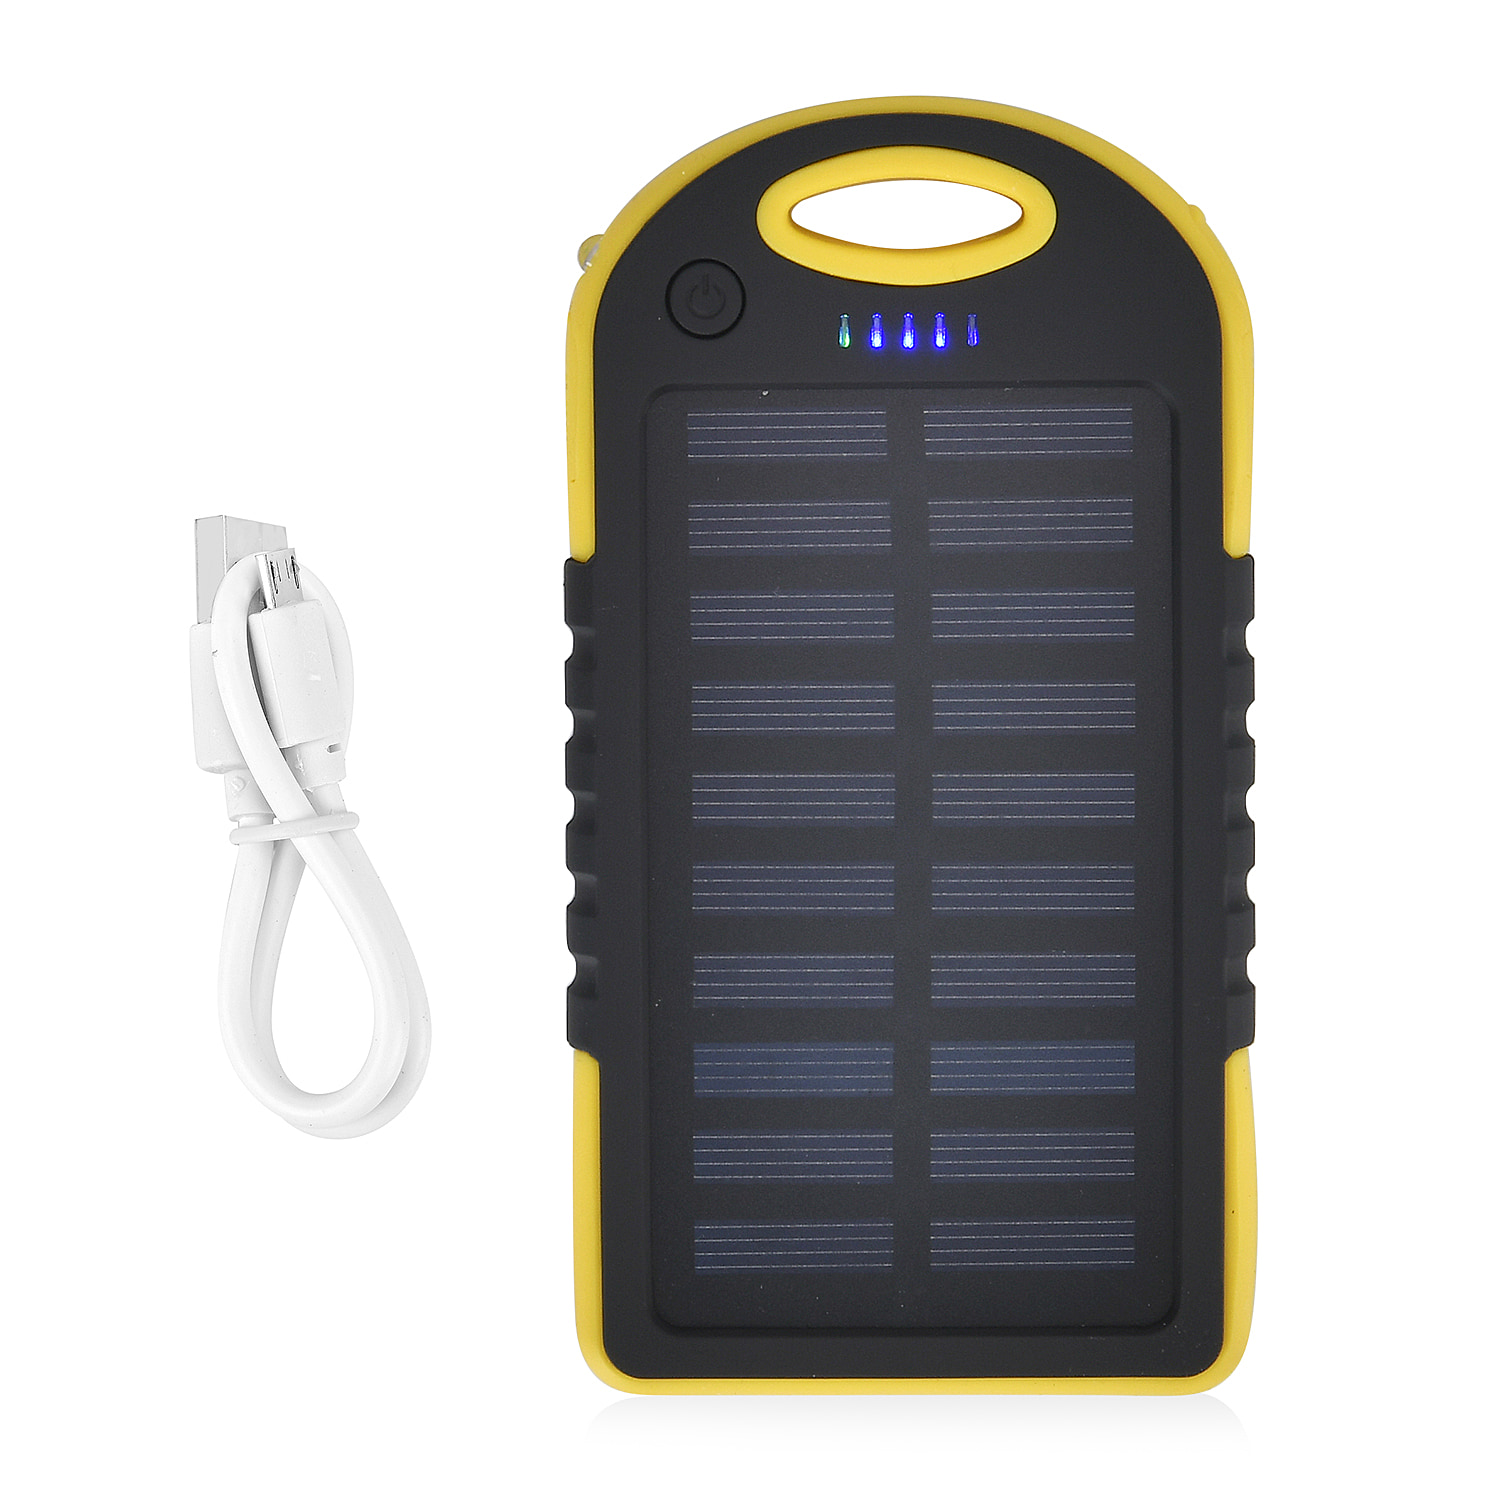 5000mAh Power Bank with Solar Panel, USB Cable (Change Android into Type C) - Yellow & Black